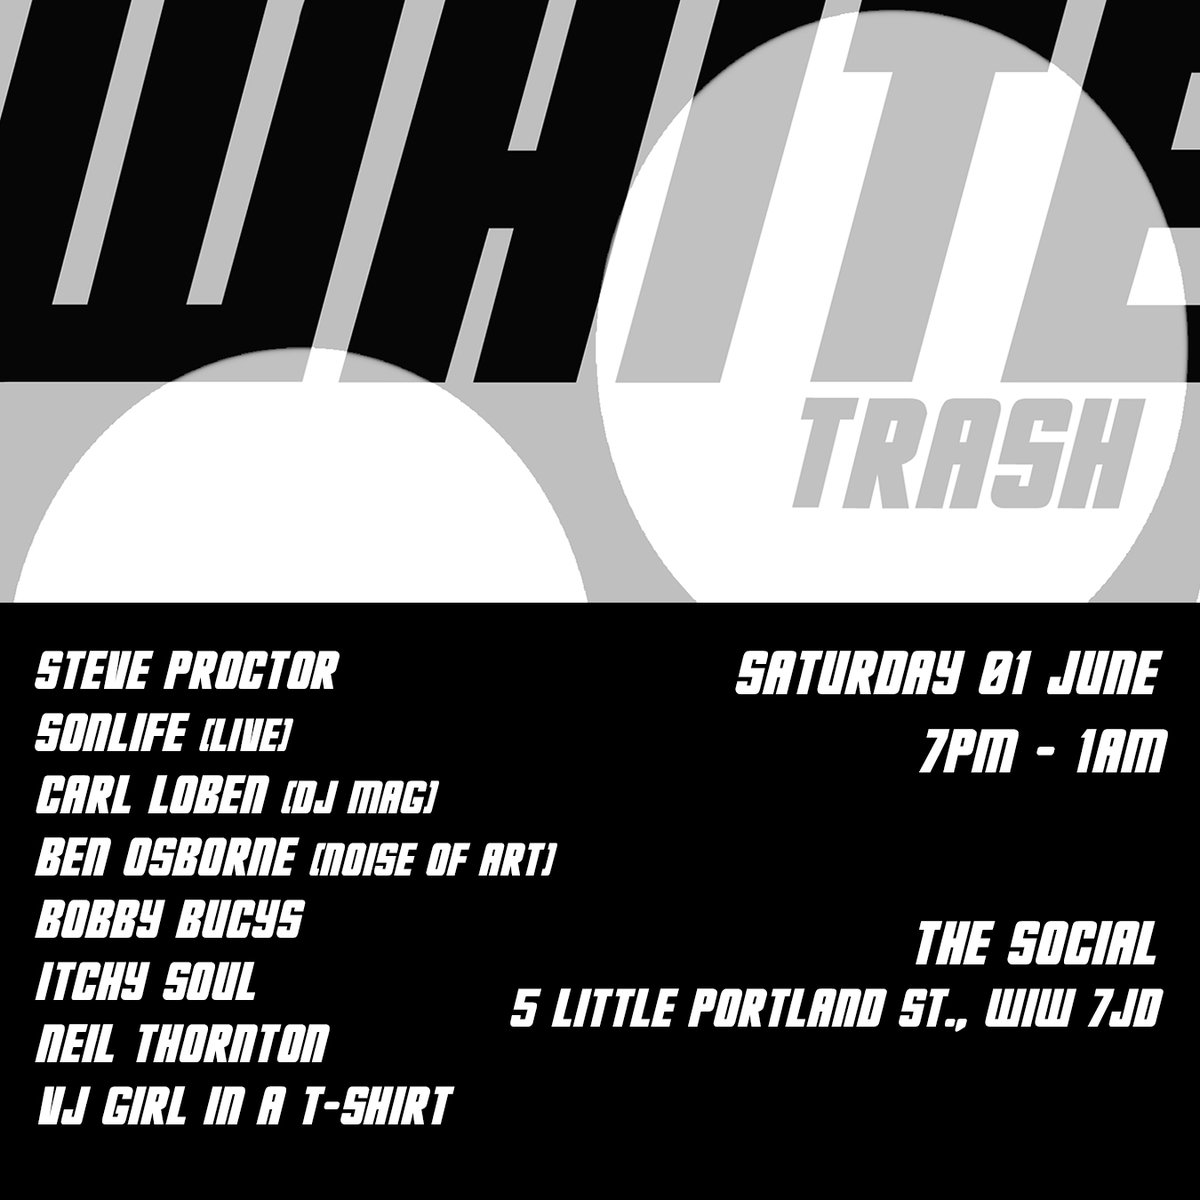 WHITE TRASH! A new night inspired by the club experimentalism of the 80's DIY, post-punk era brought to us by @djbenosborne (Noise of Art) who's put together a mighty lineup for their first night in the basement on 1 Jun. Big stuff, tickets here: thesocial.com/events/white-t…